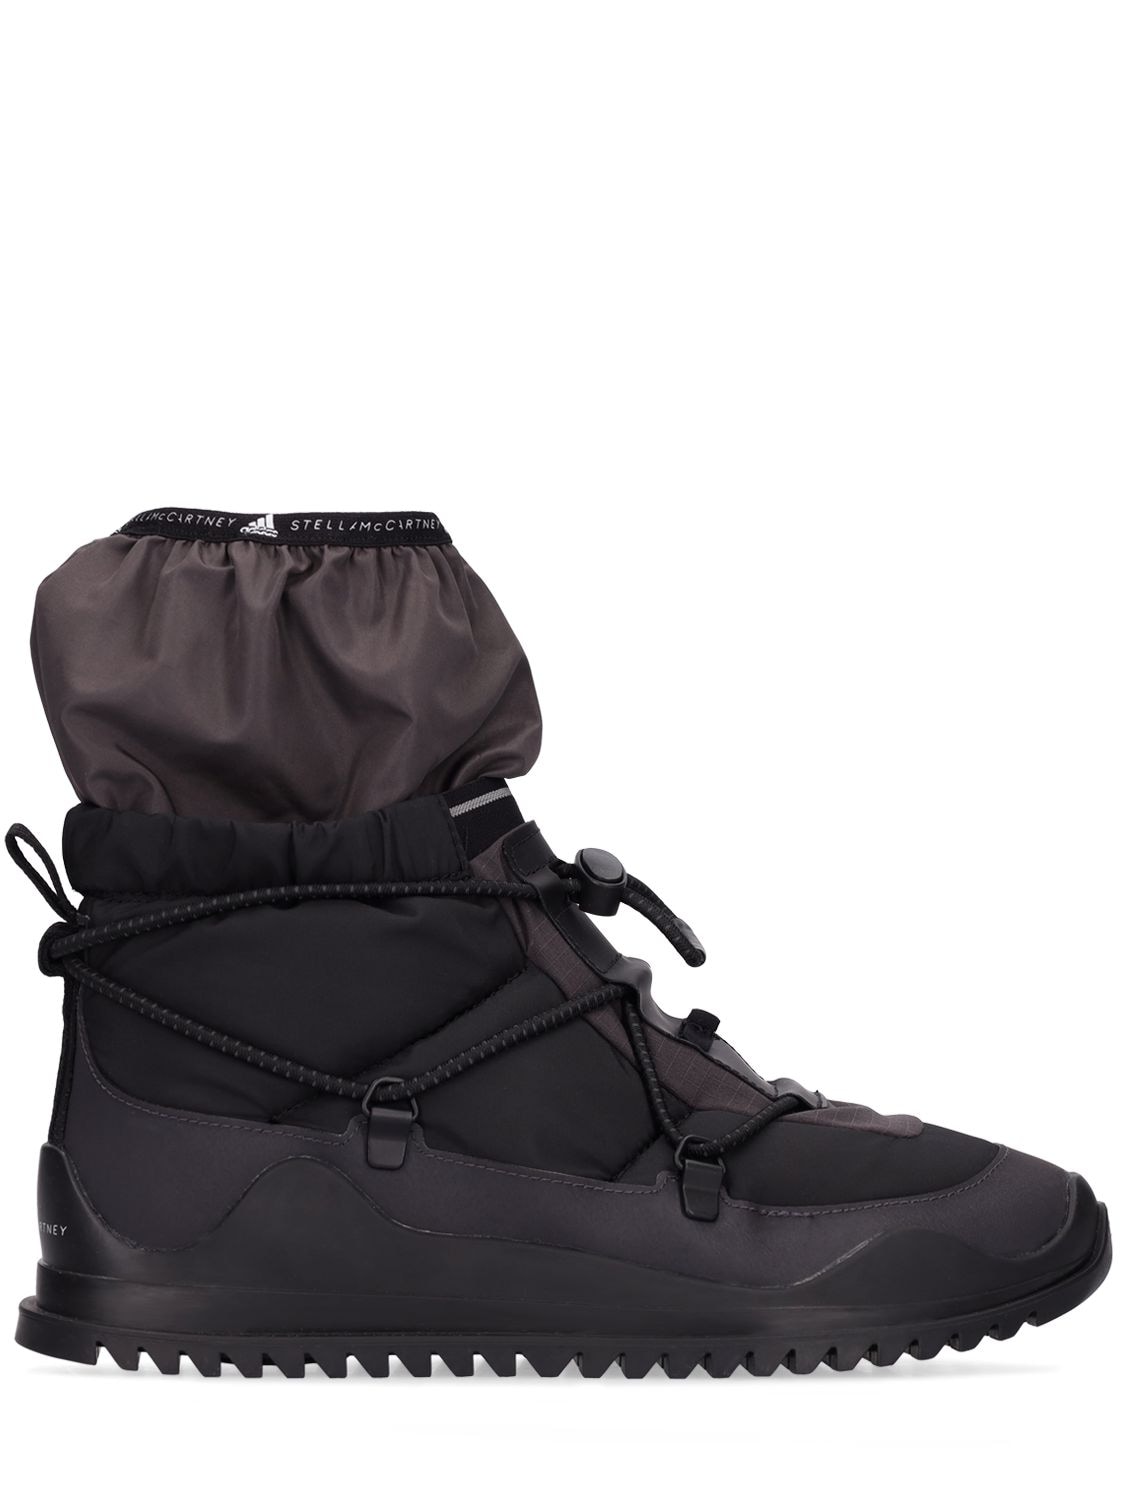 Asmc Winter Cold Ready Boots